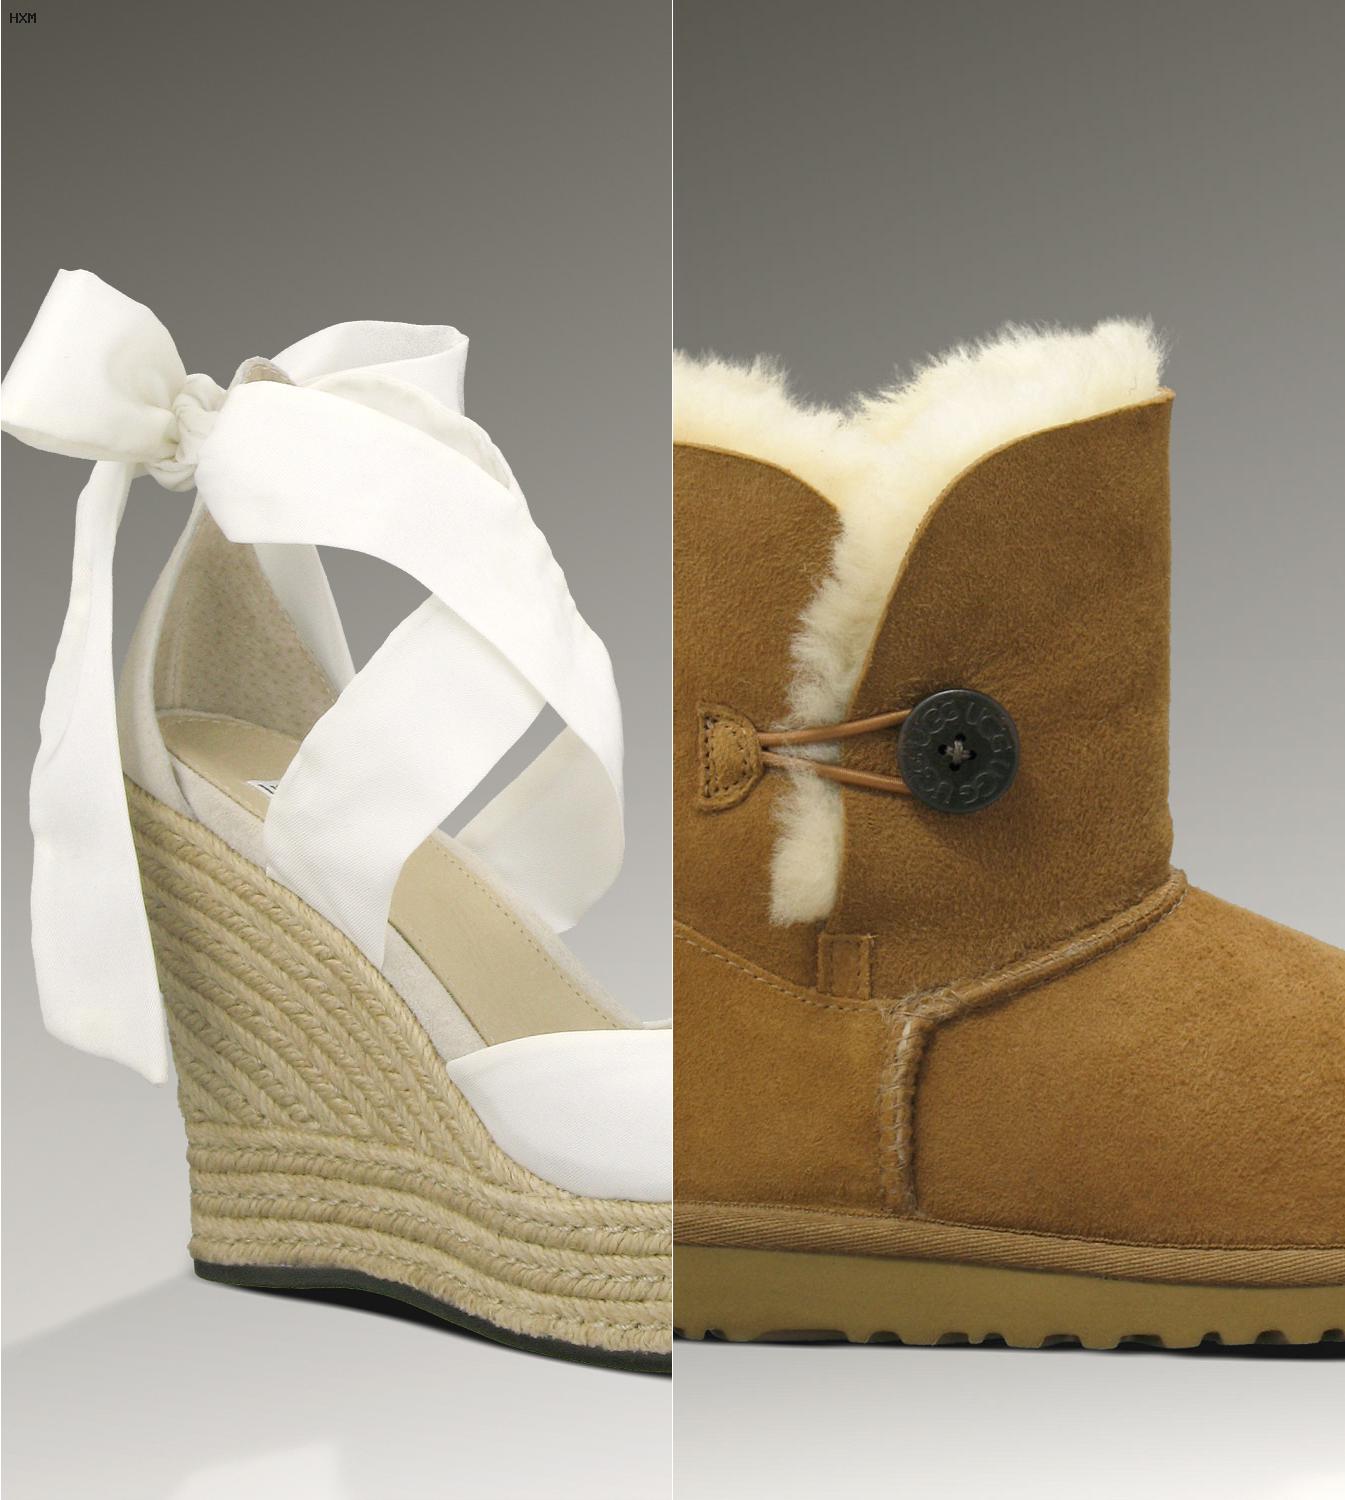 ugg petite fille pas cher